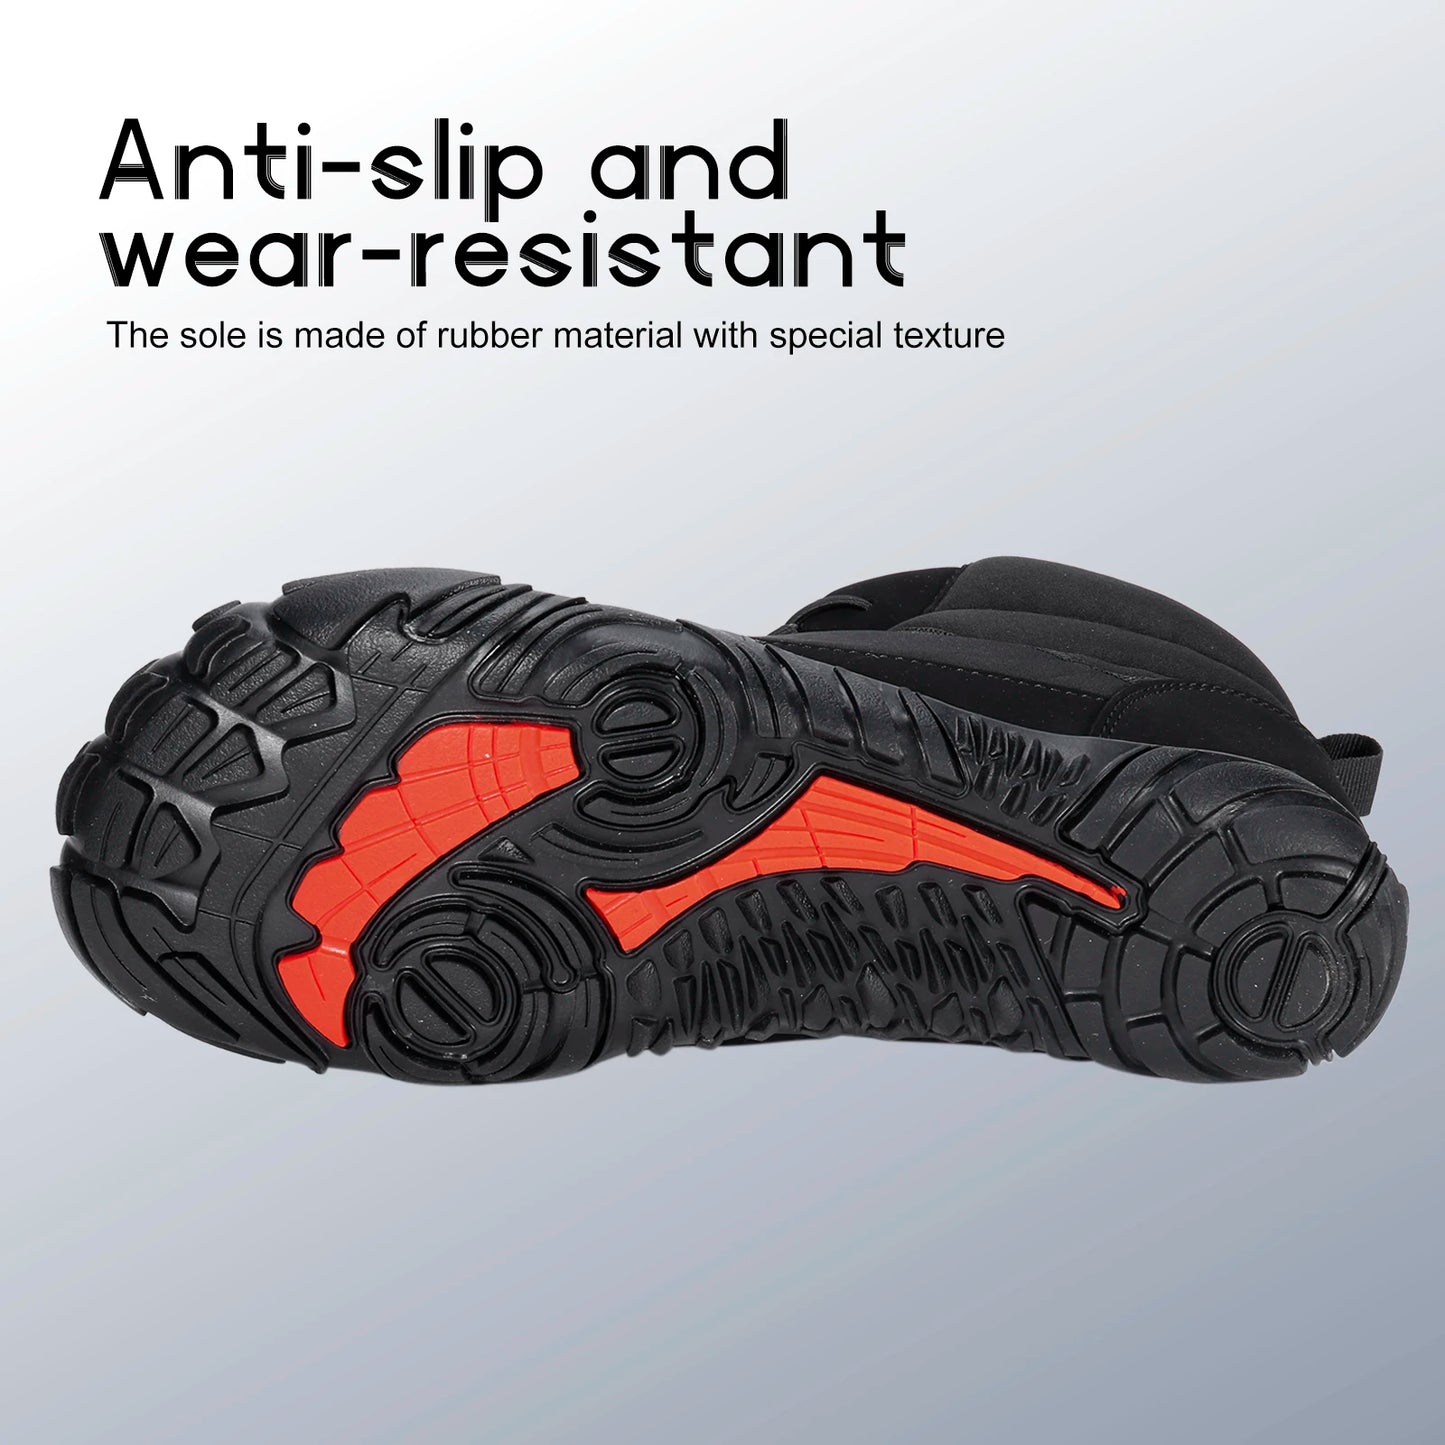 Rubber Running Barefoot Shoes Waterproof Non-Slip Breathable